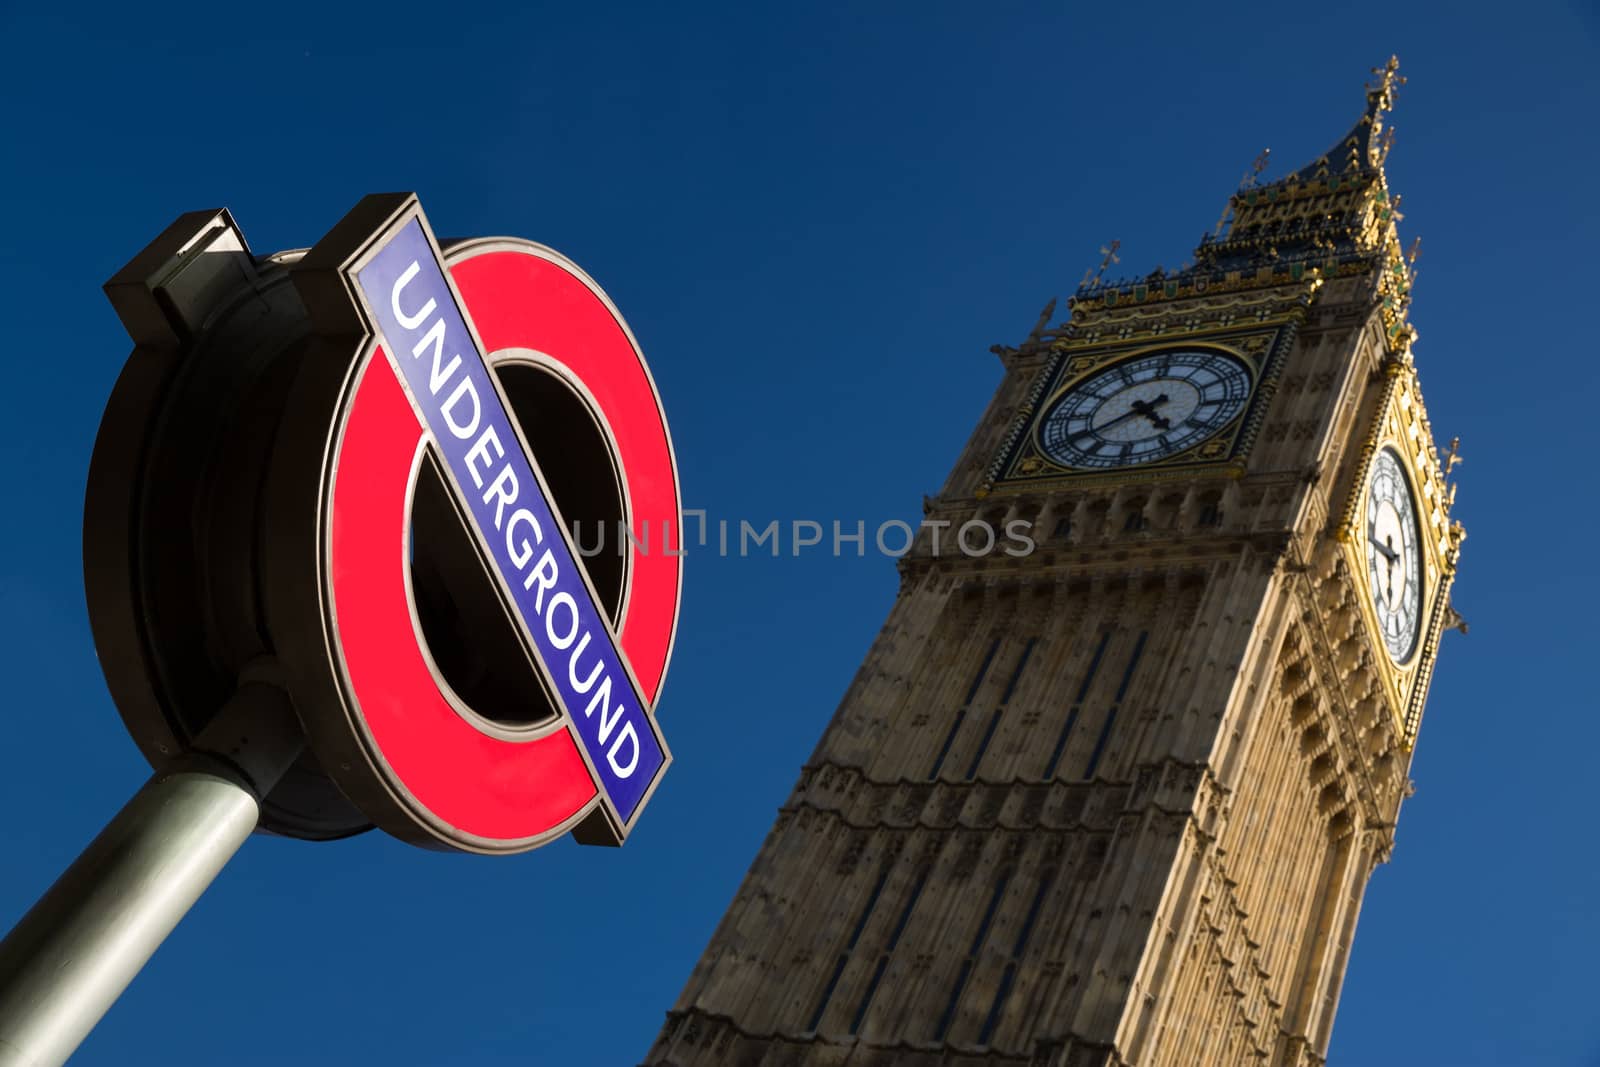 An image of the palace of Westminster with a color image of the underground sign in the foreground